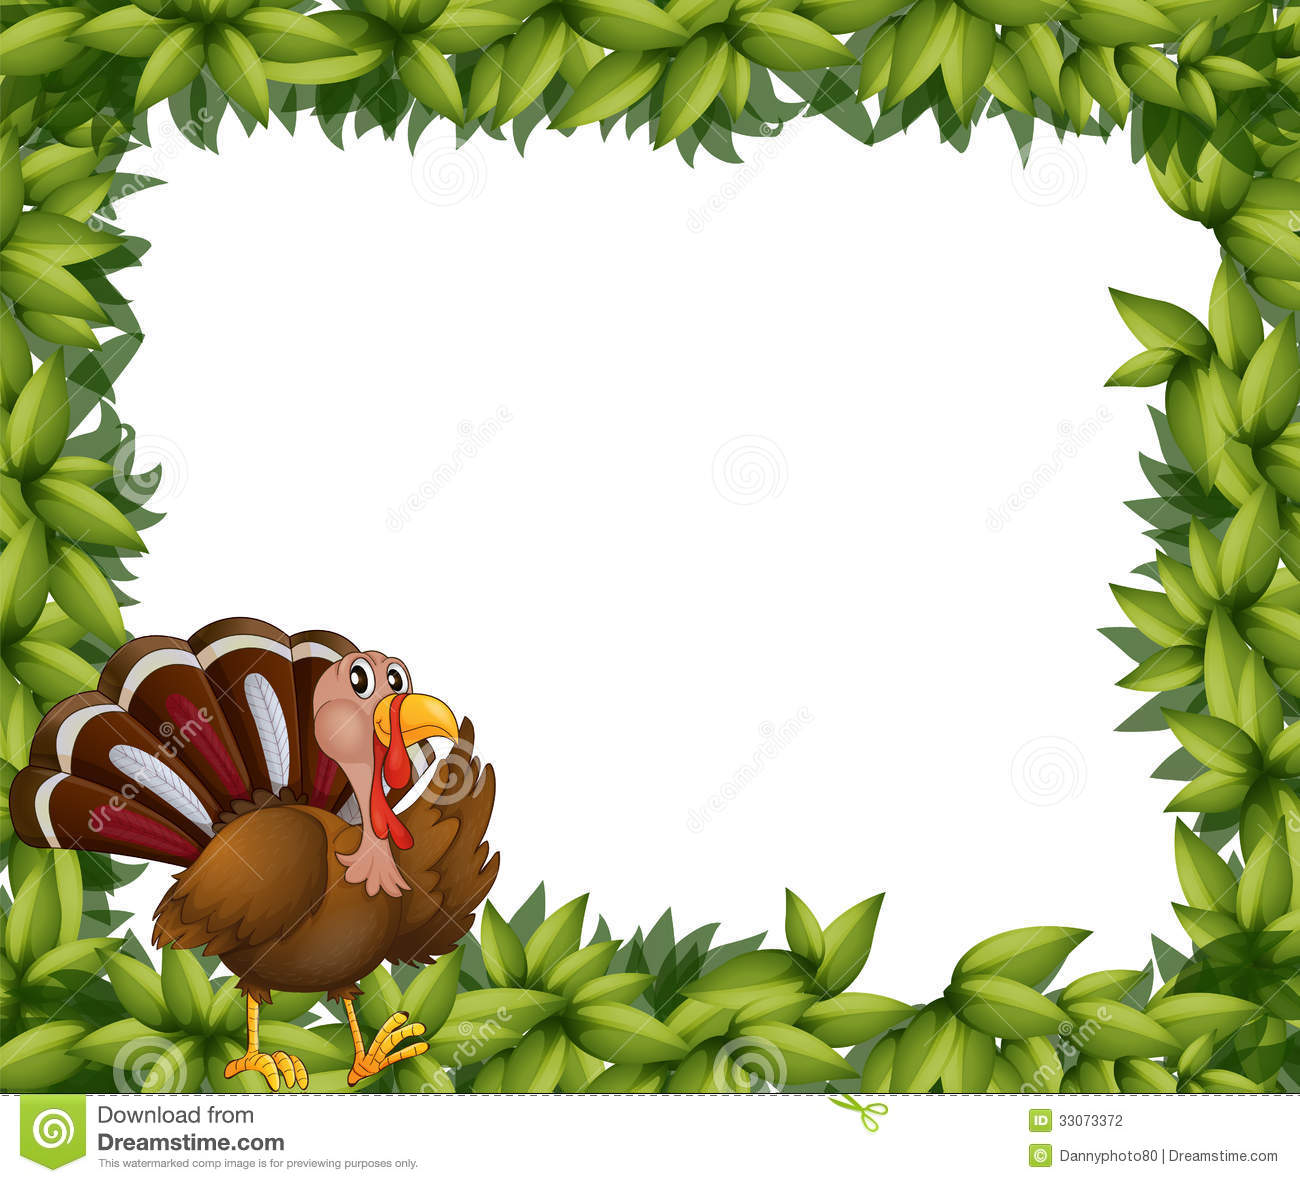 Green Frame Border With A Turkey Stock Photography   Image  33073372